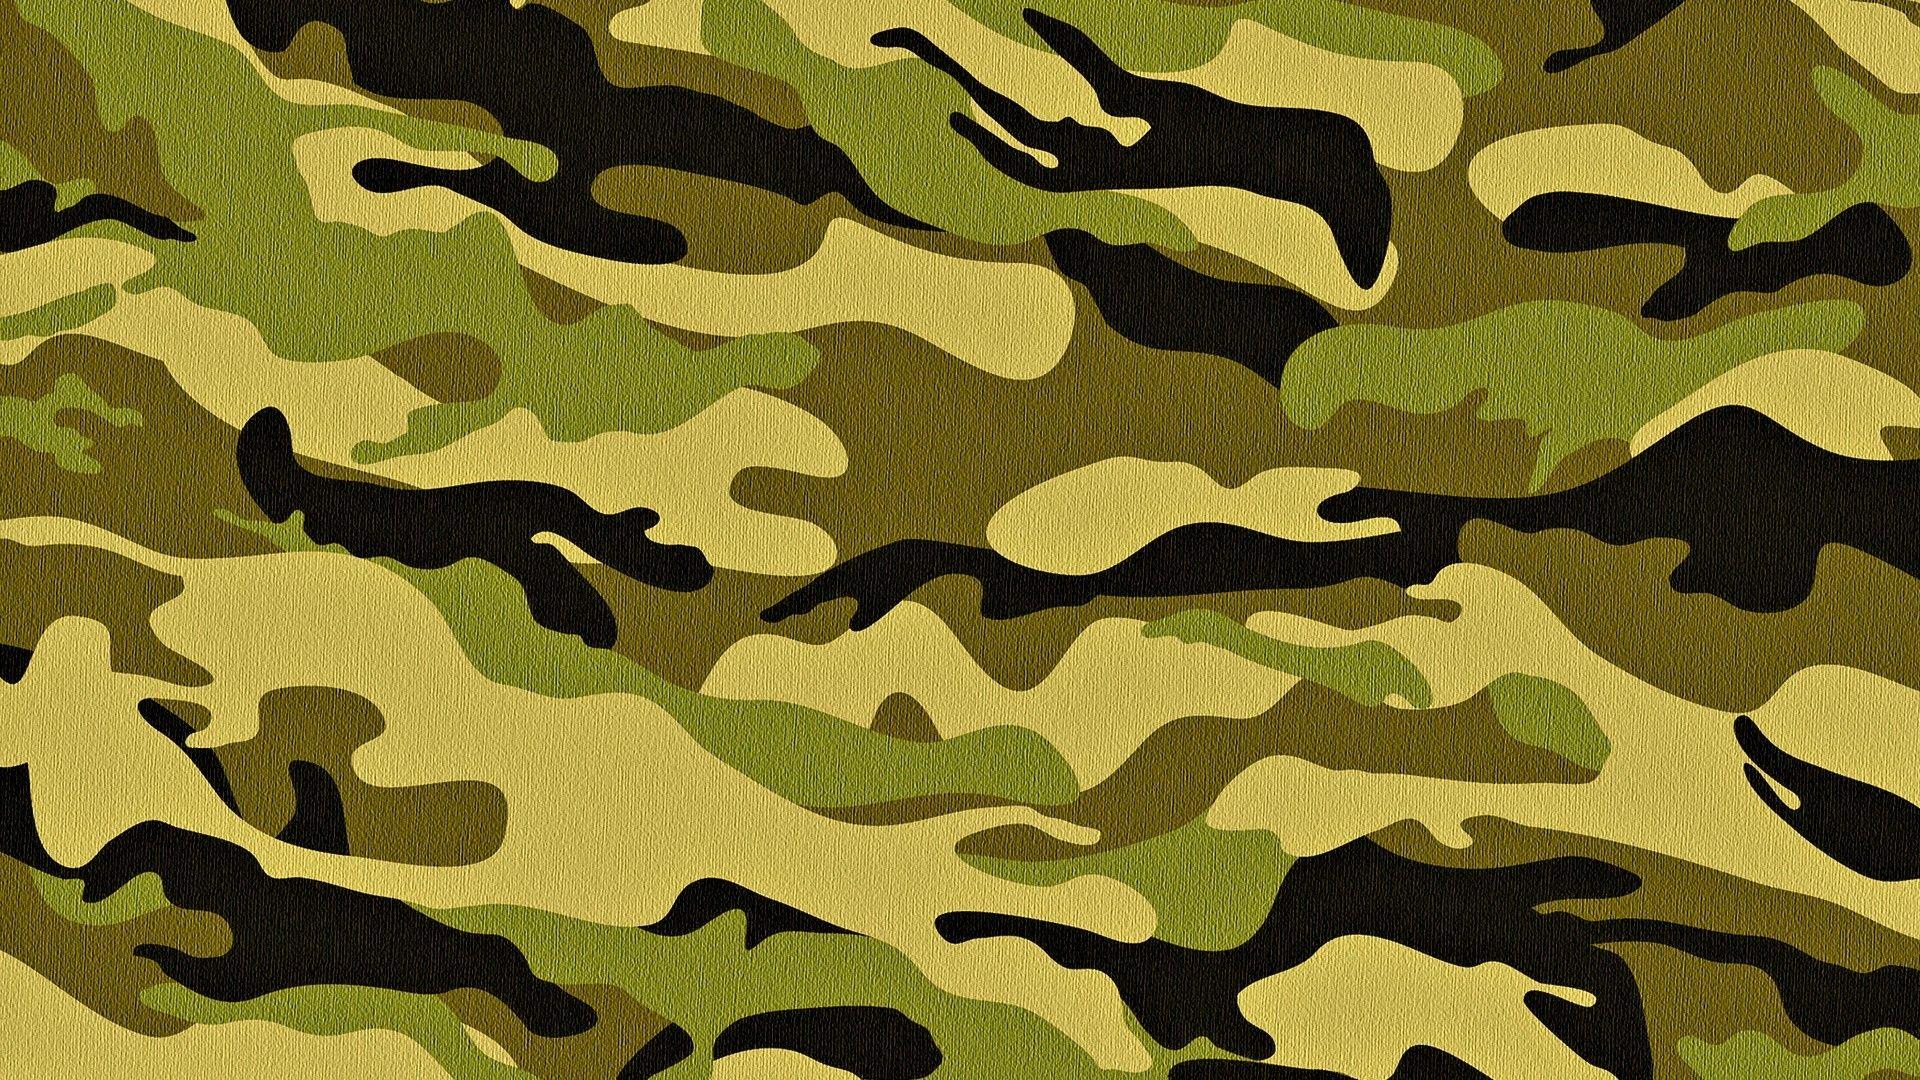 Textures camouflage wallpaper. PC